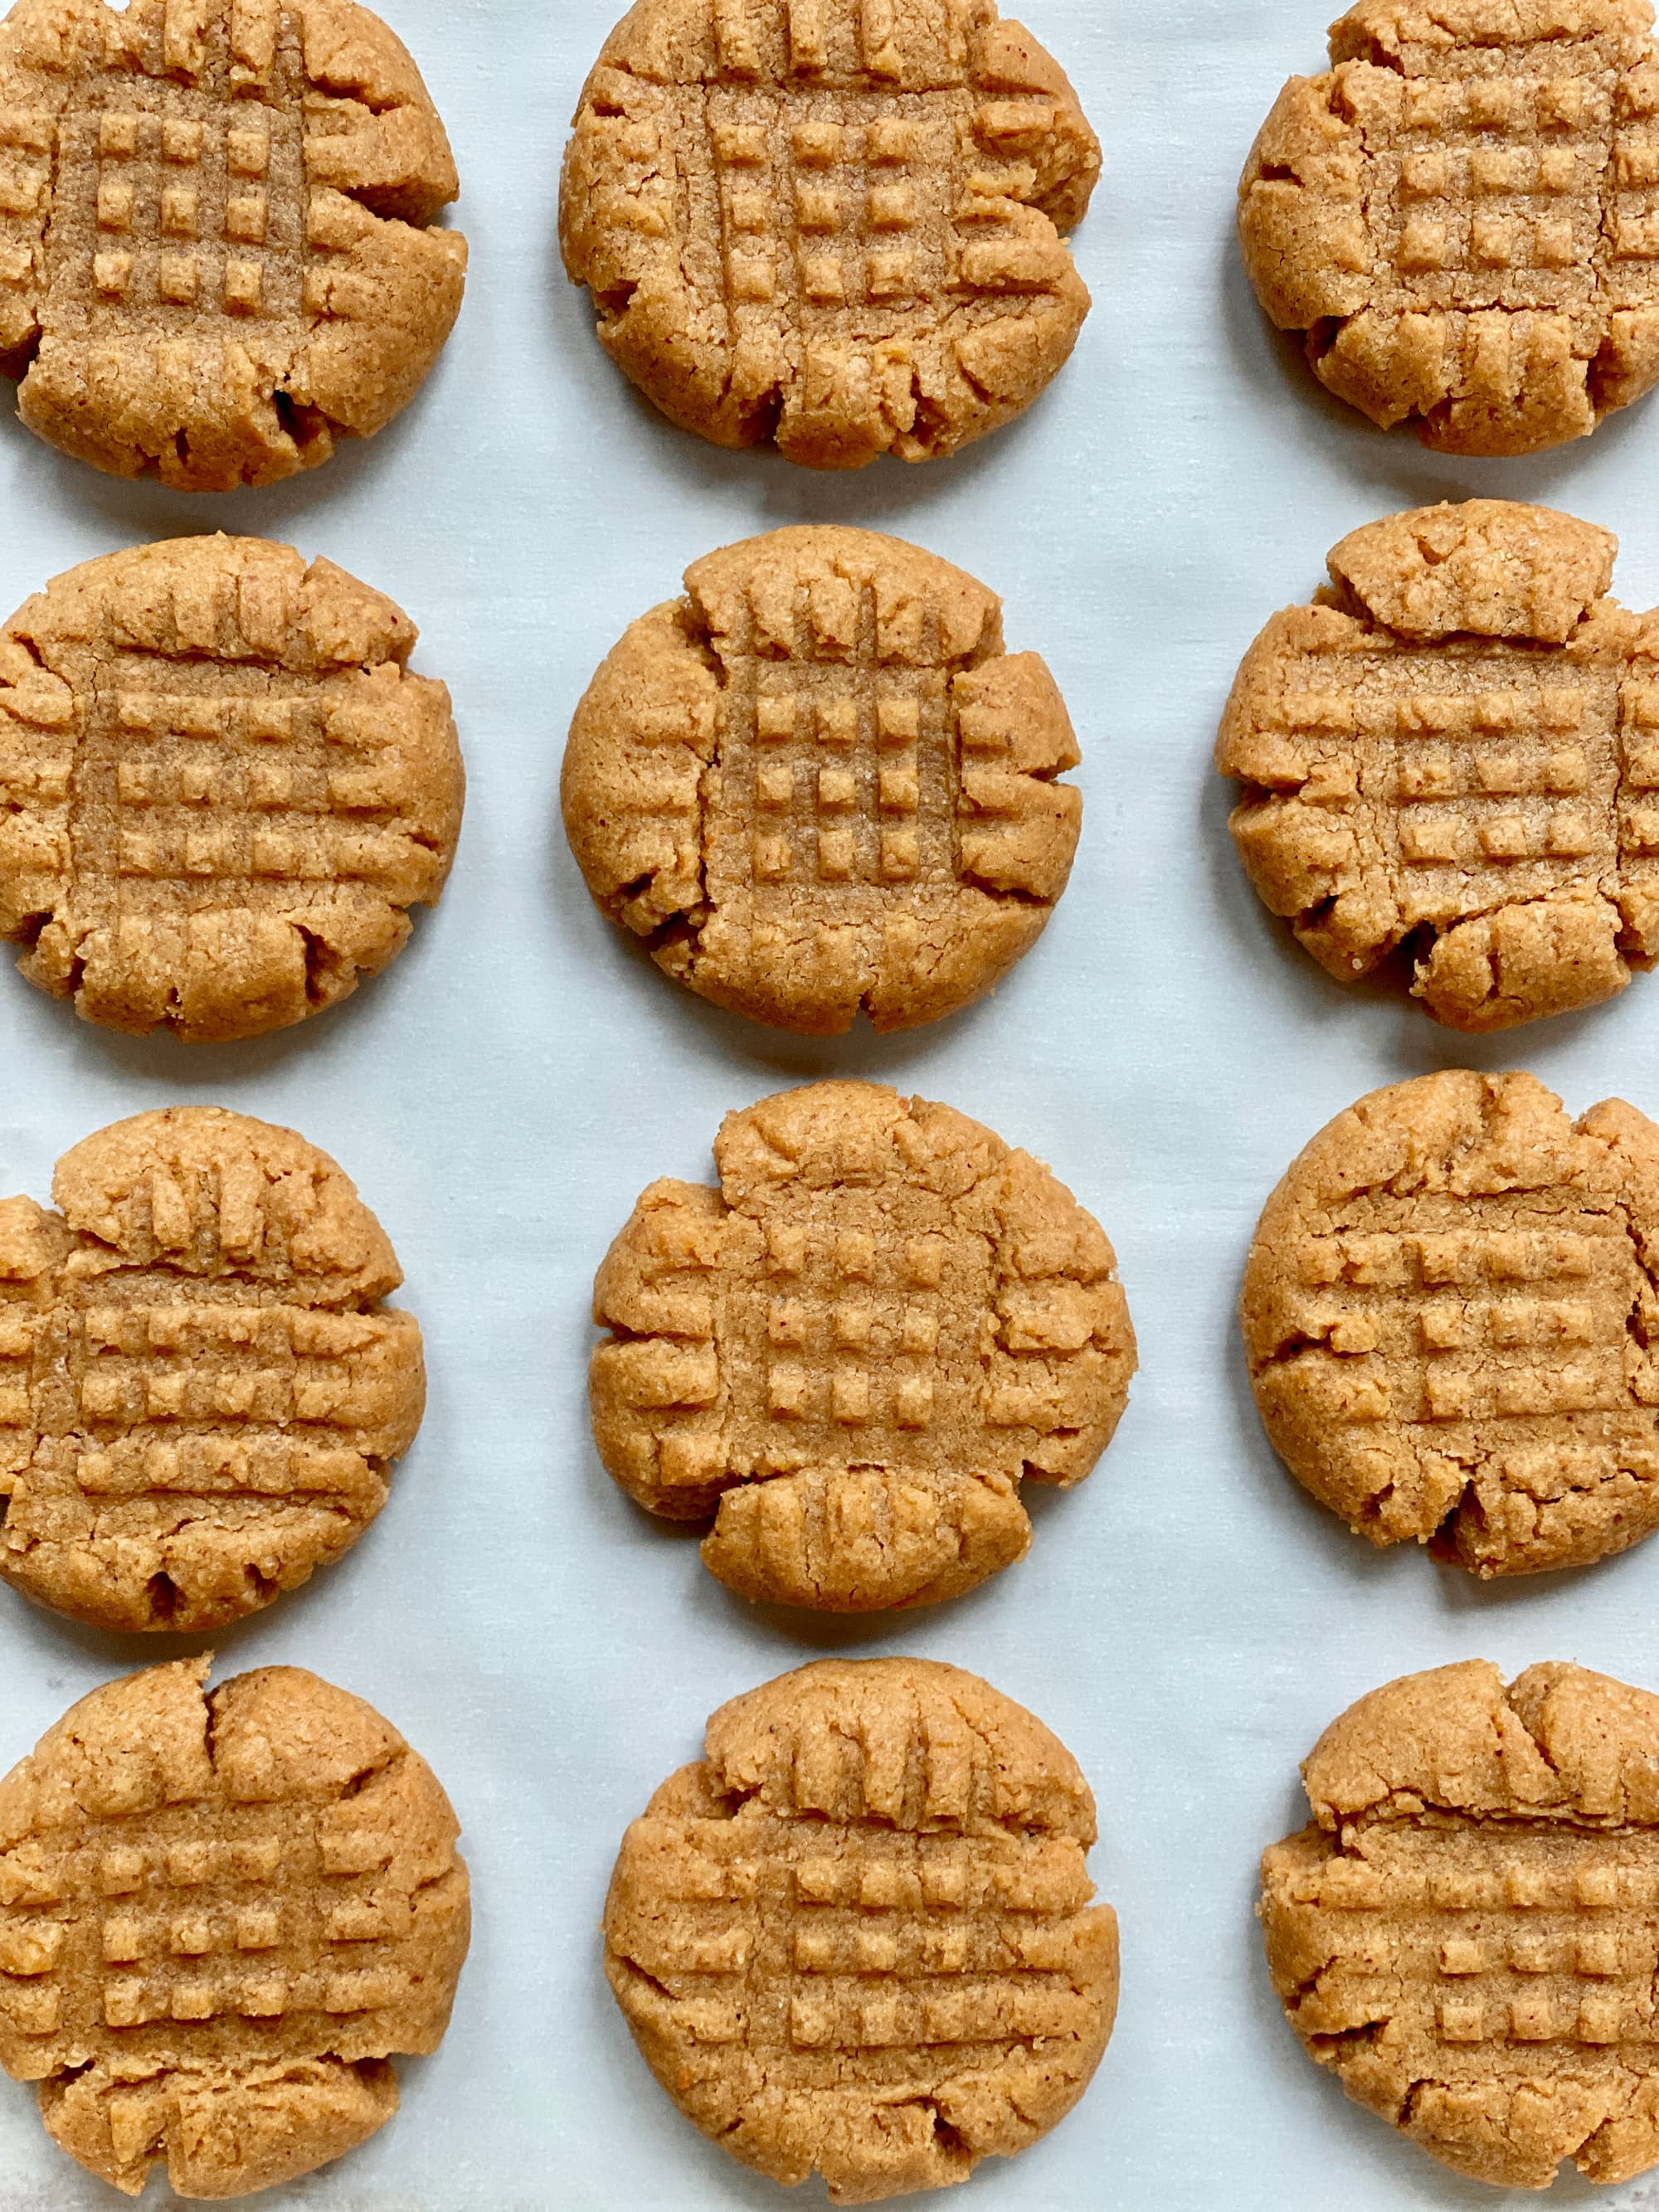 Easy Bake Oven peanut butter cookies Recipe 